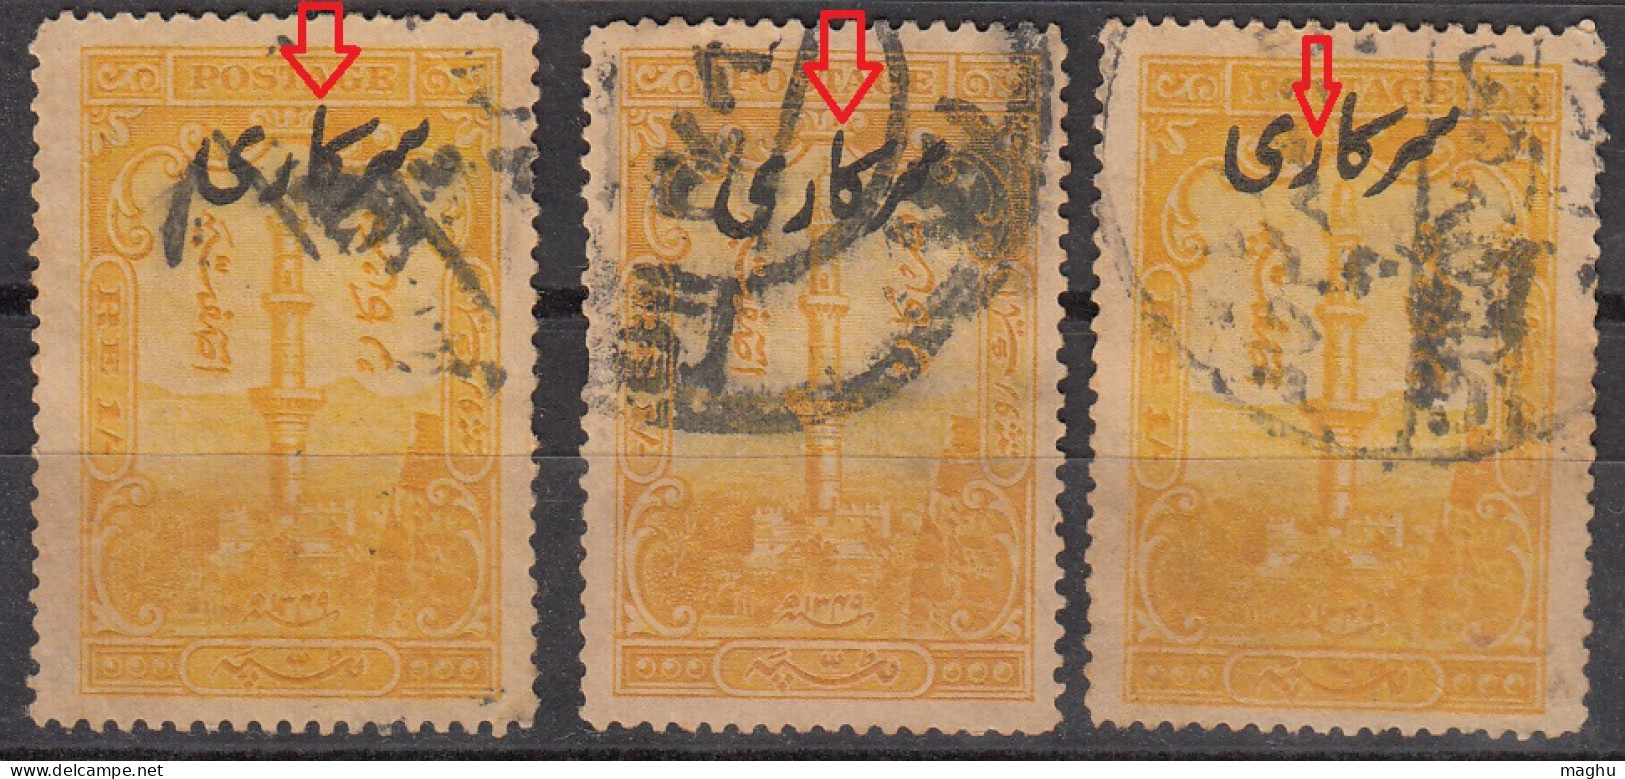 3 Diff., Shade / Opvt., Variety, Hyderabad Used 1934-1944, Official / Service 1r Victory Tower, British India, SG 053 - Hyderabad